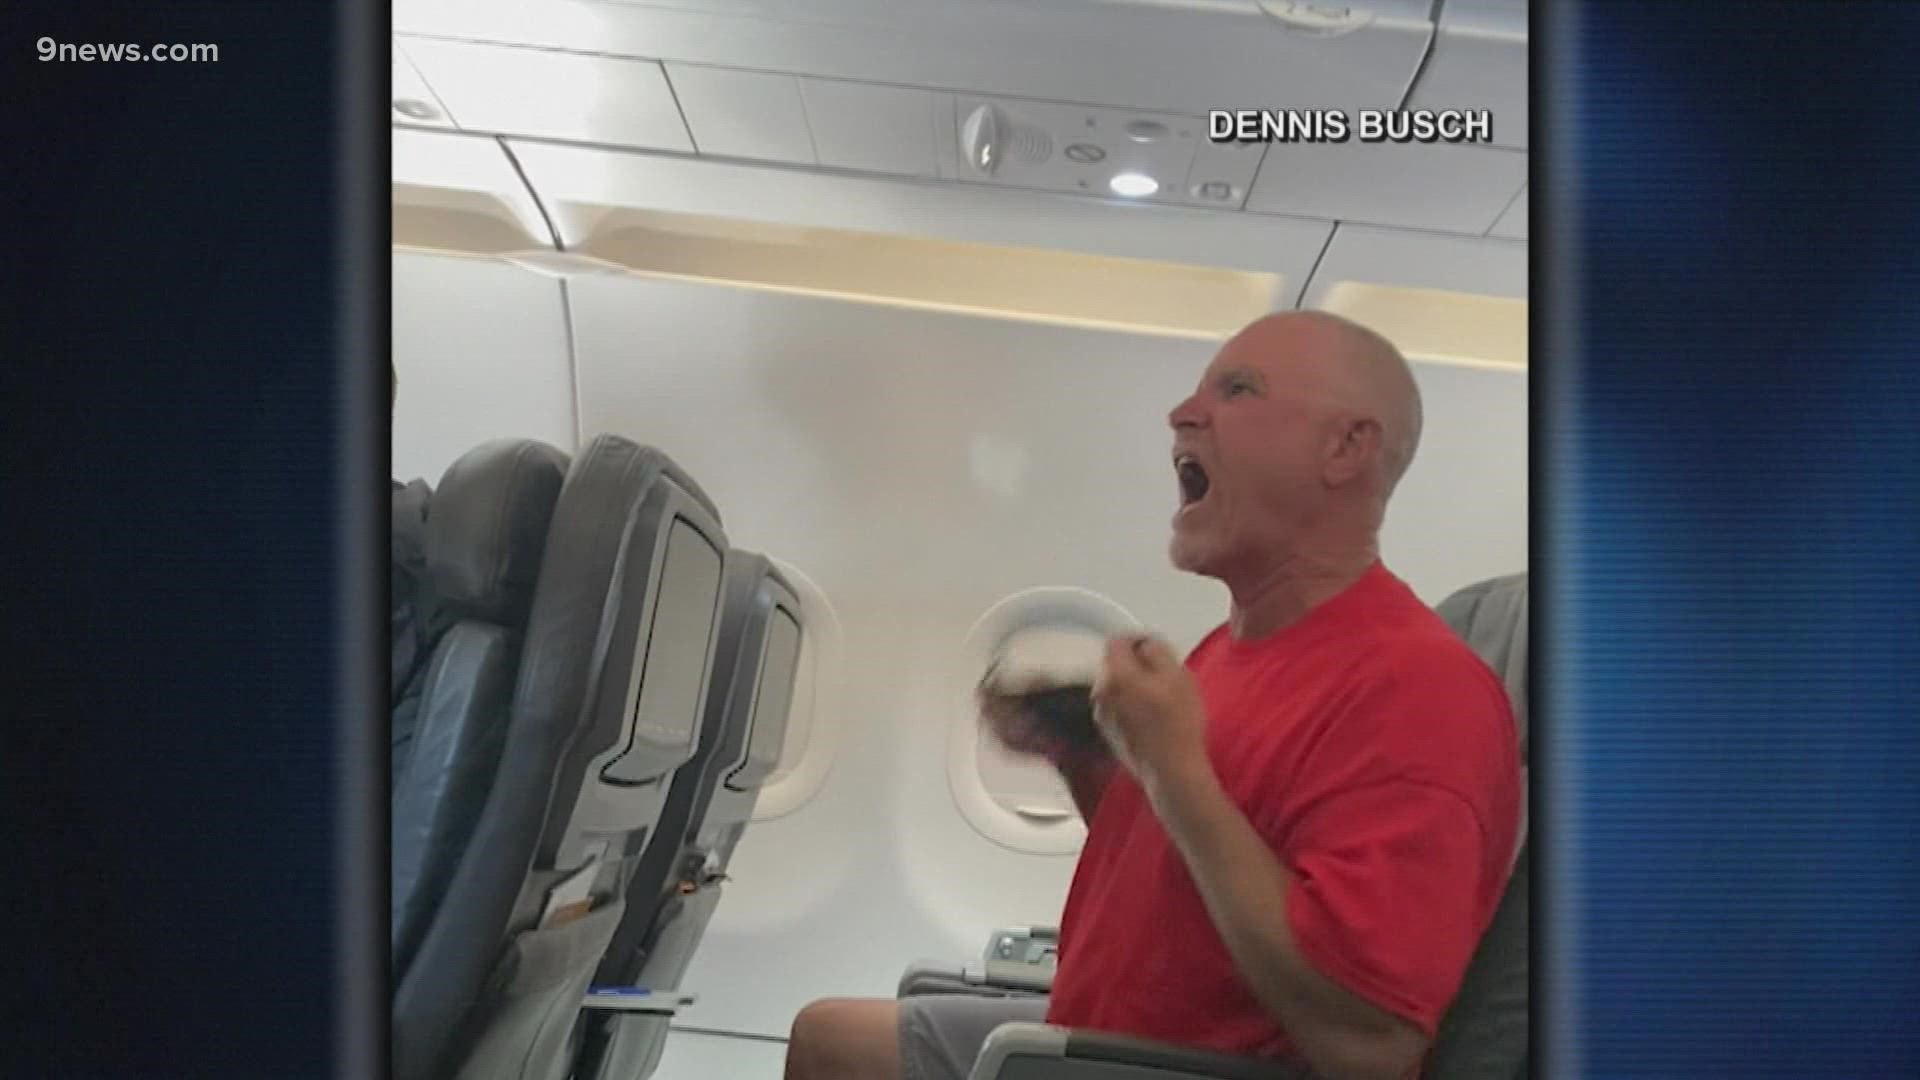 A 61-year-old man on a flight from LA to Salt Lake was cited for public intoxication, disorderly conduct after arguing and growling at the flight crew.